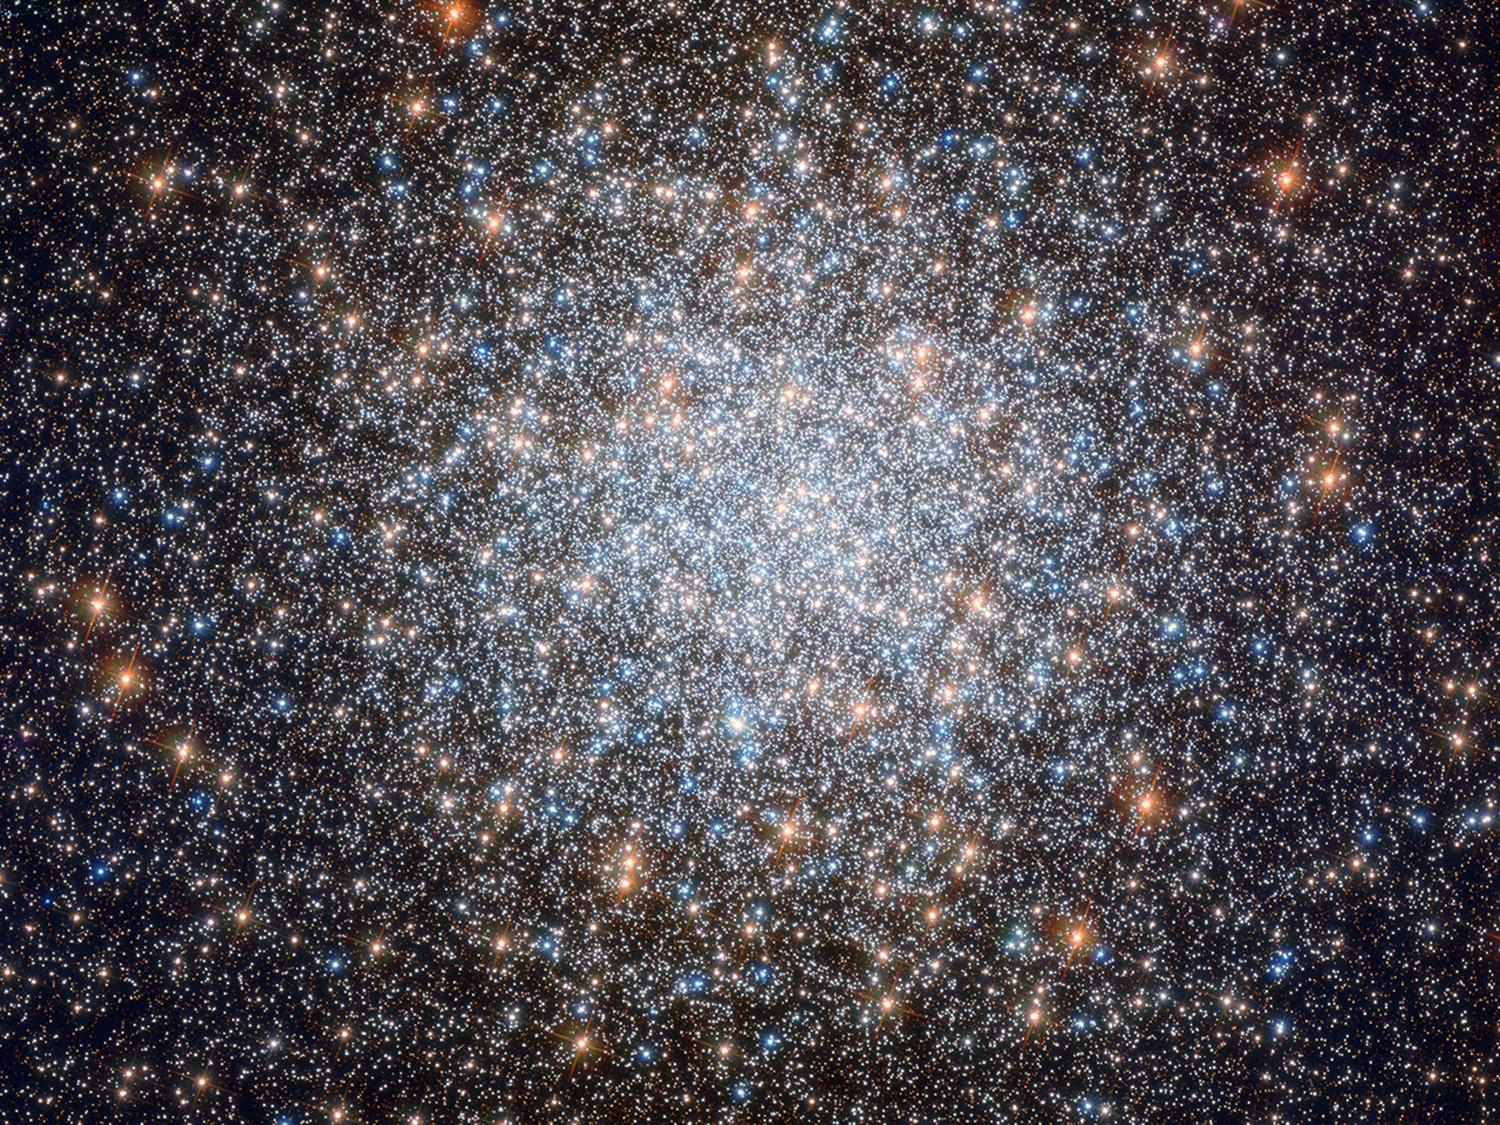 Image of a cloud cluster of Messier-3